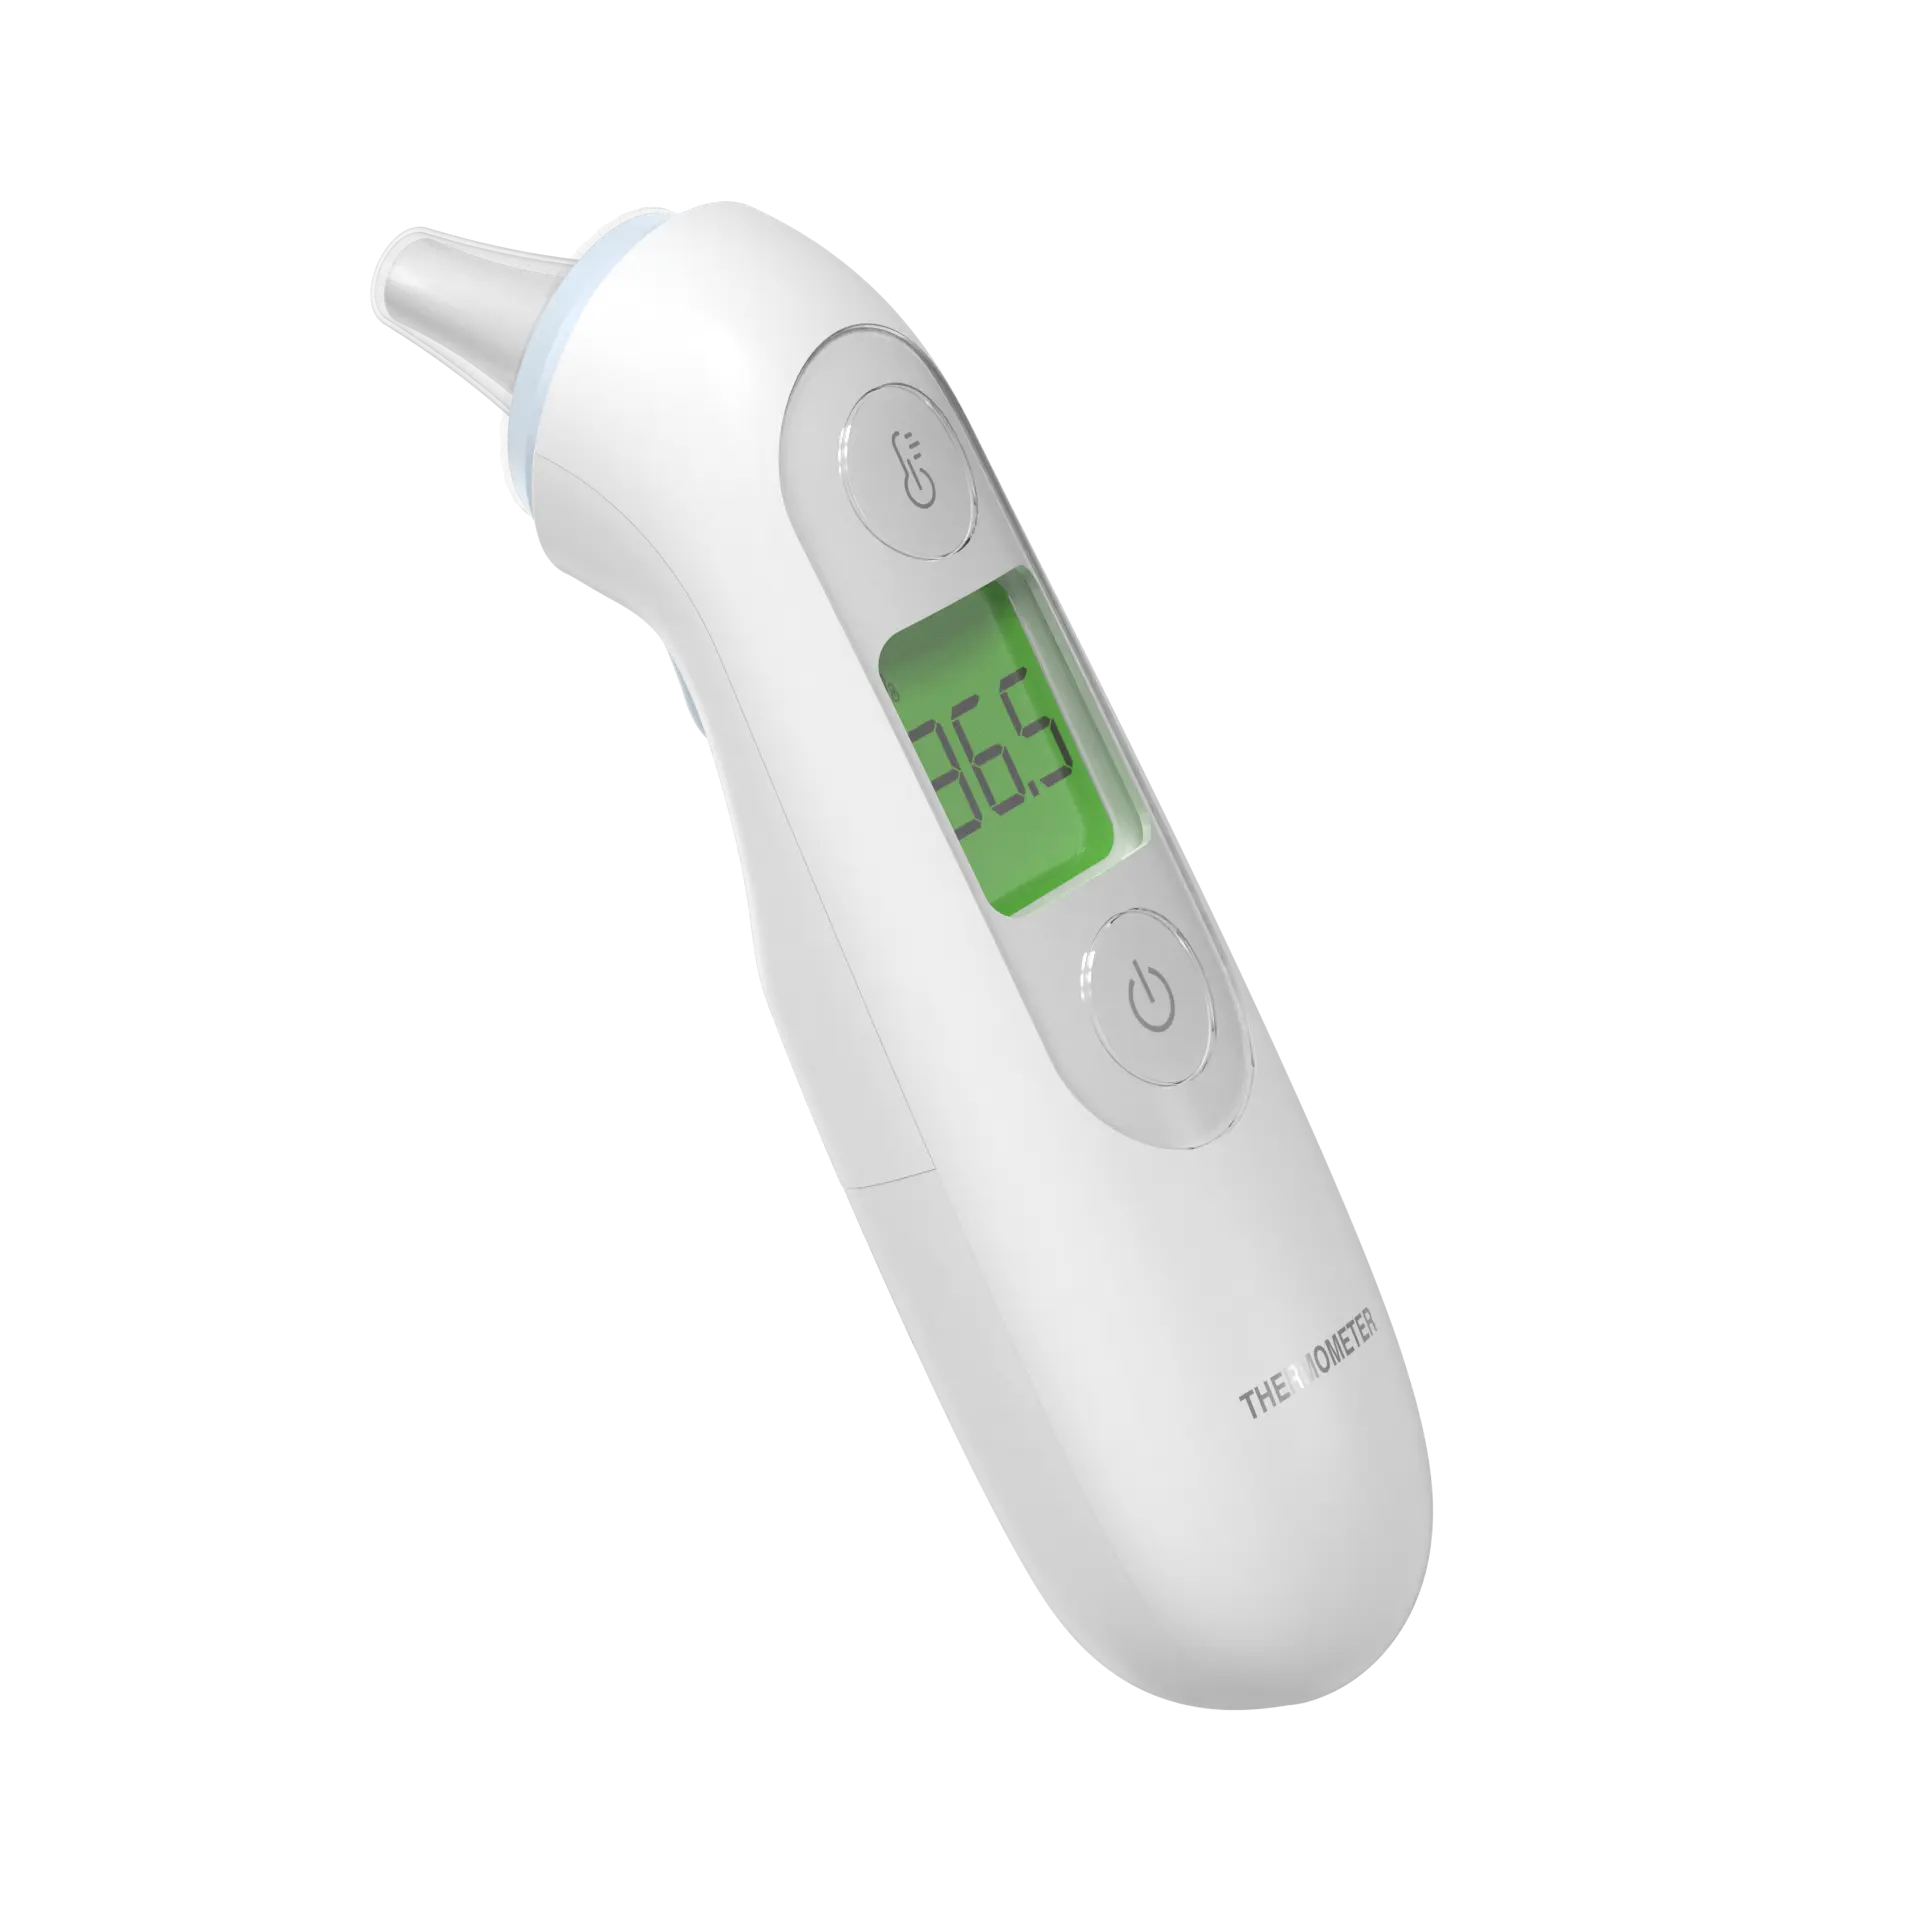 HUAAN MED Elektronisches berührungs loses Thermometer Medizinisches digitales Termo metro Baby-Thermometer Infrarot-Stirn ohr thermometer